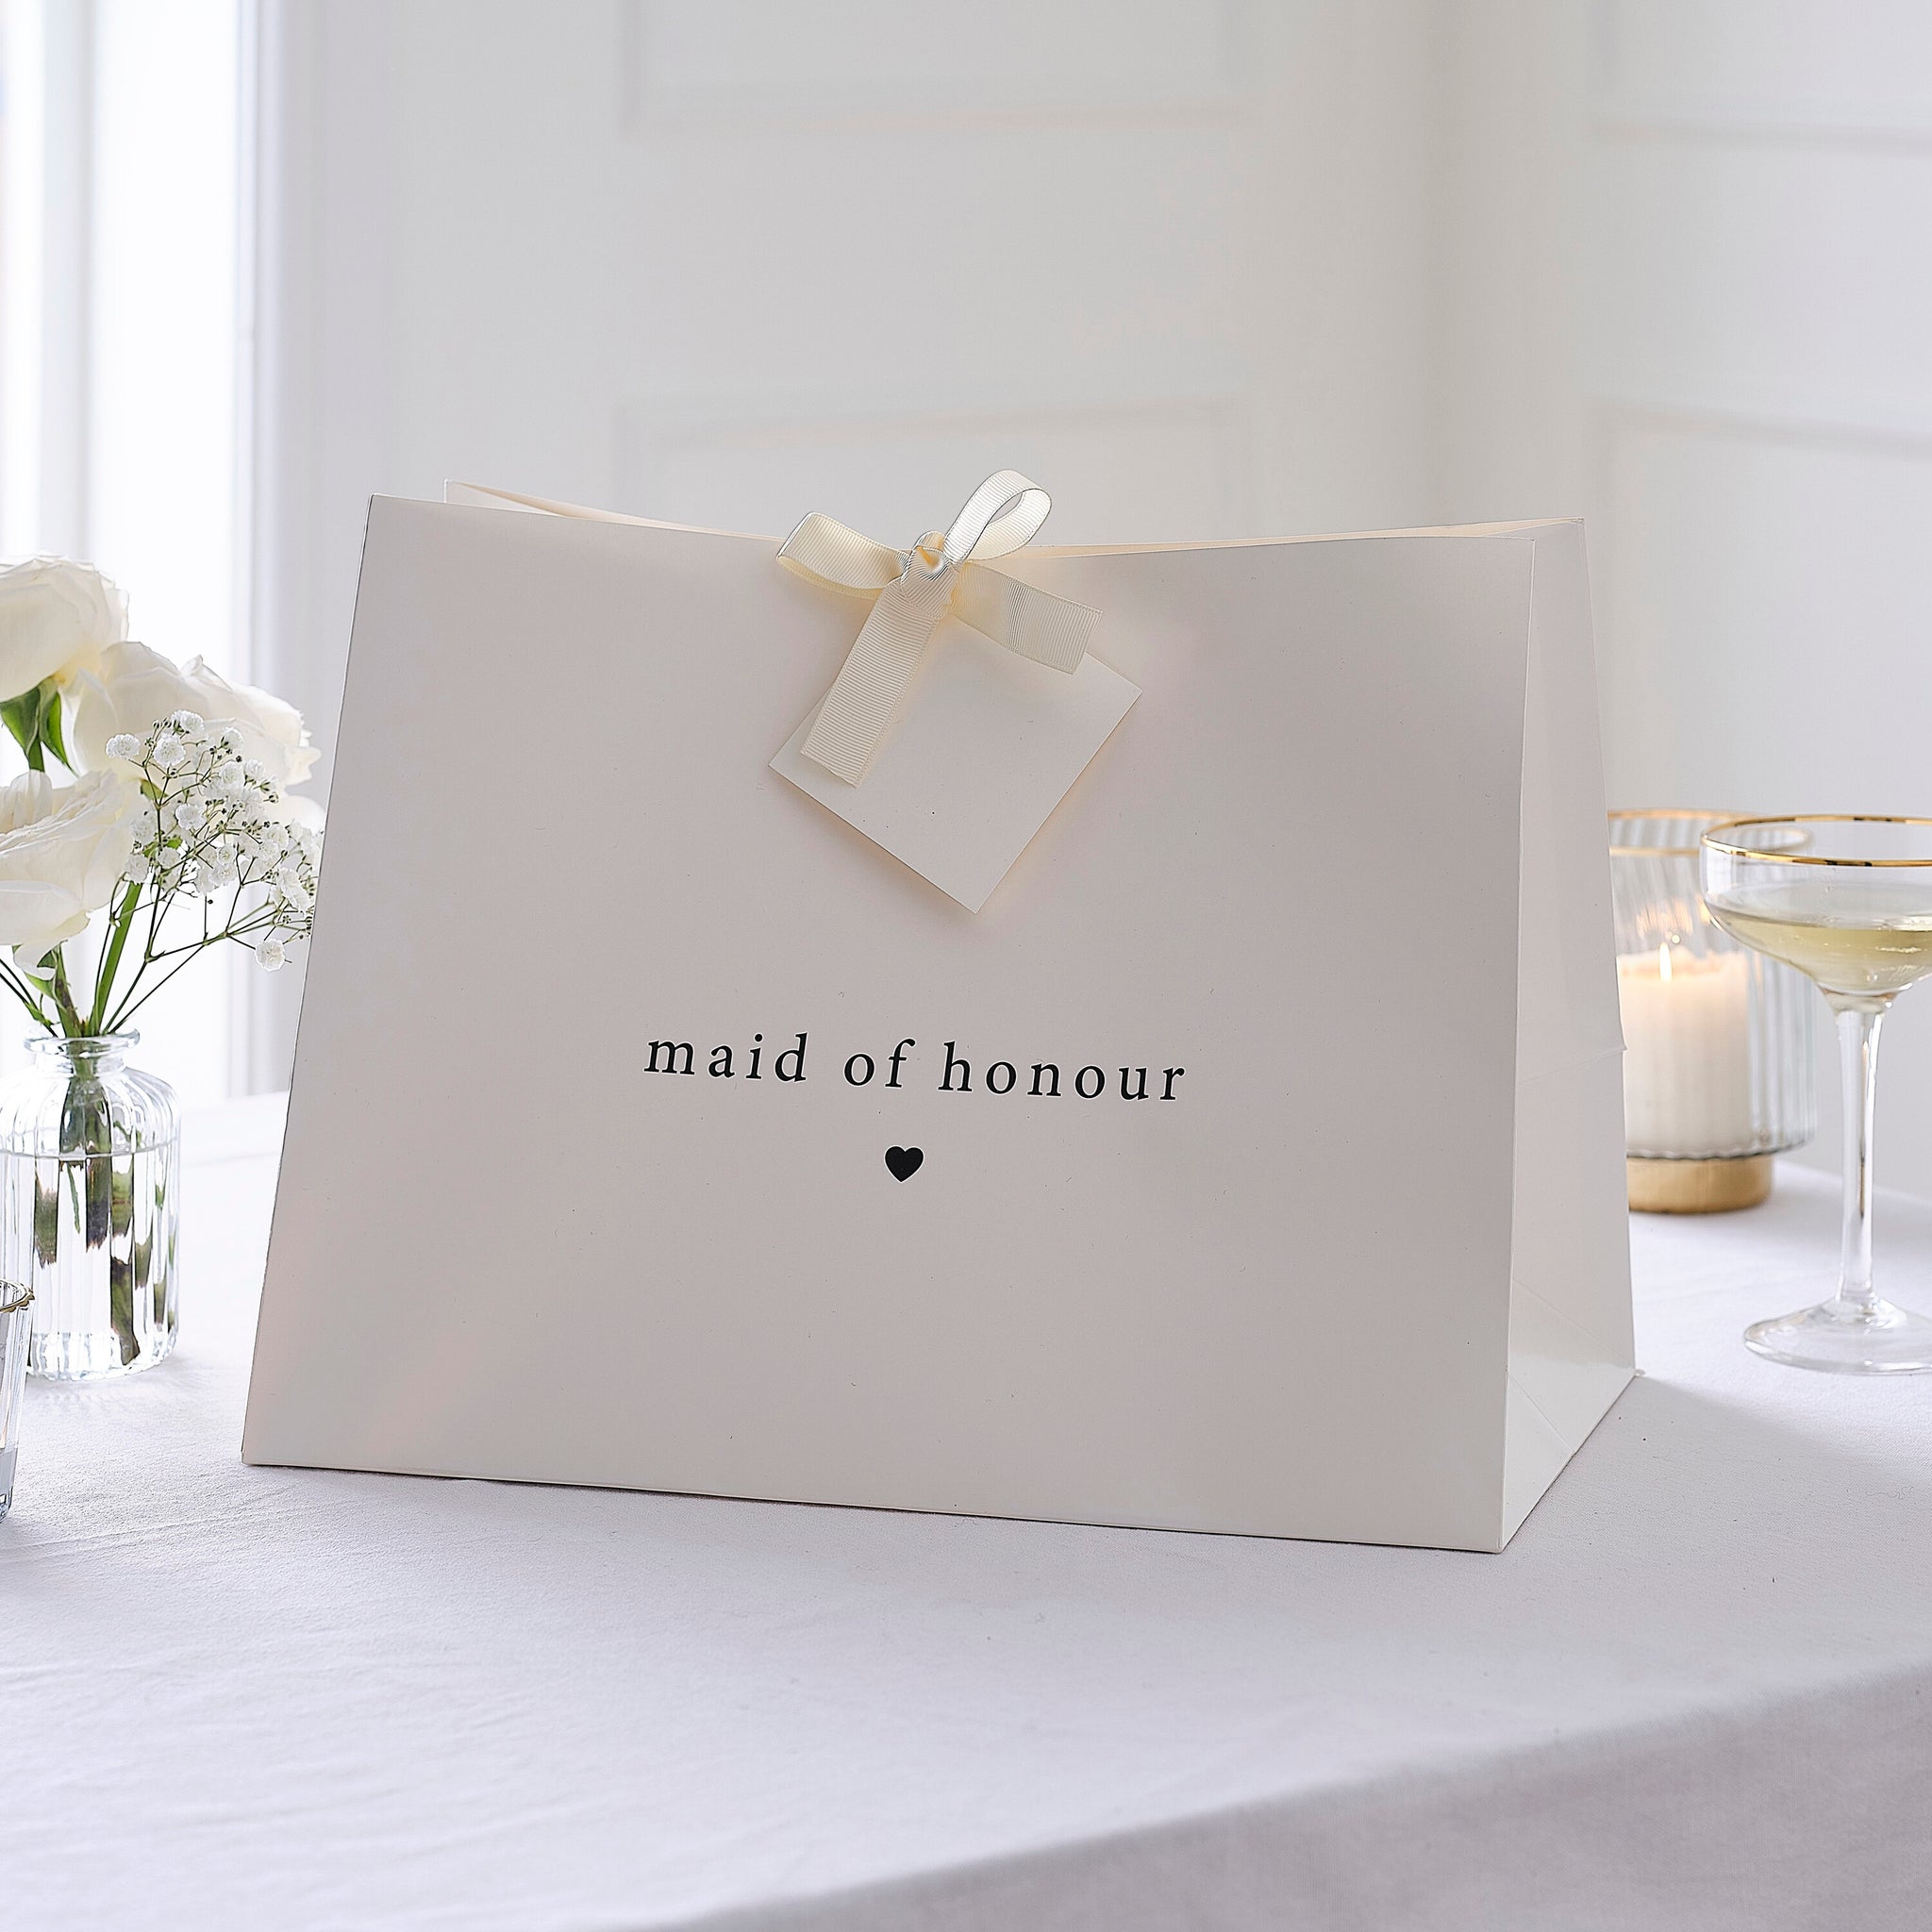 White Maid of Honour Gift Bag - Modern Luxe Wedding - The Pretty Prop Shop Parties